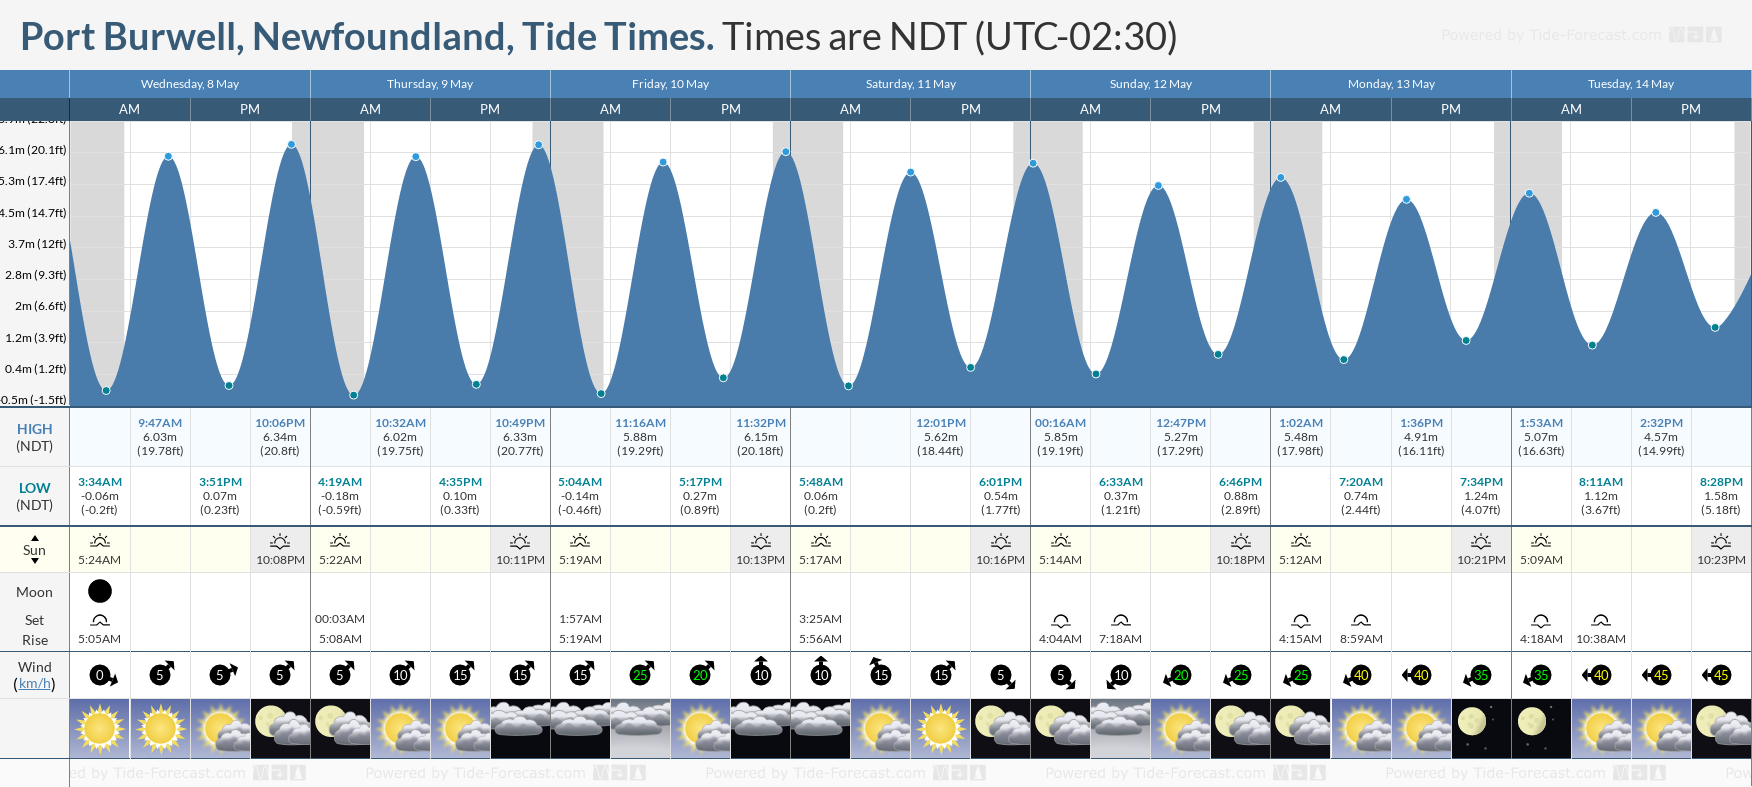 Port Burwell, Newfoundland Tide Chart including high and low tide times for the next 7 days